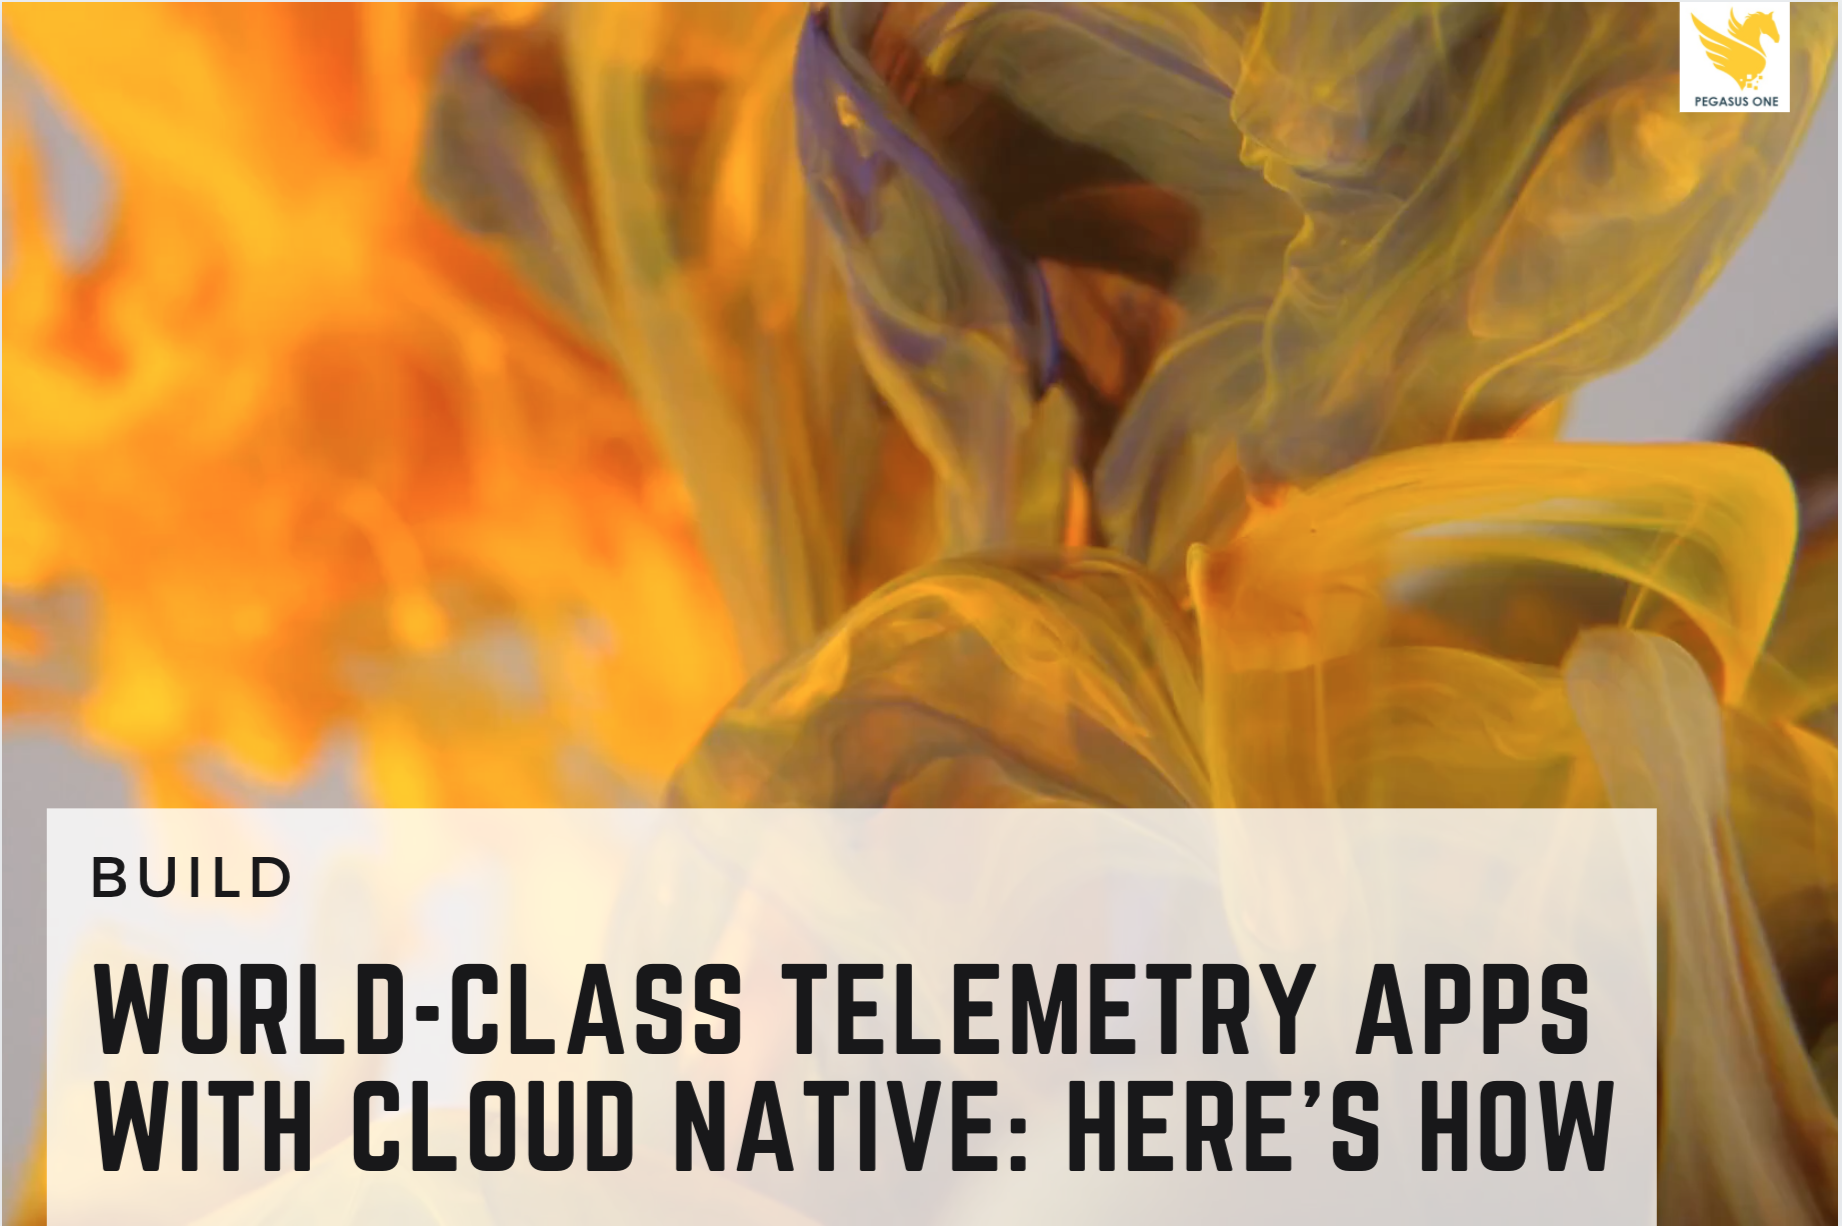 Creating better telemetry apps with Cloud Native